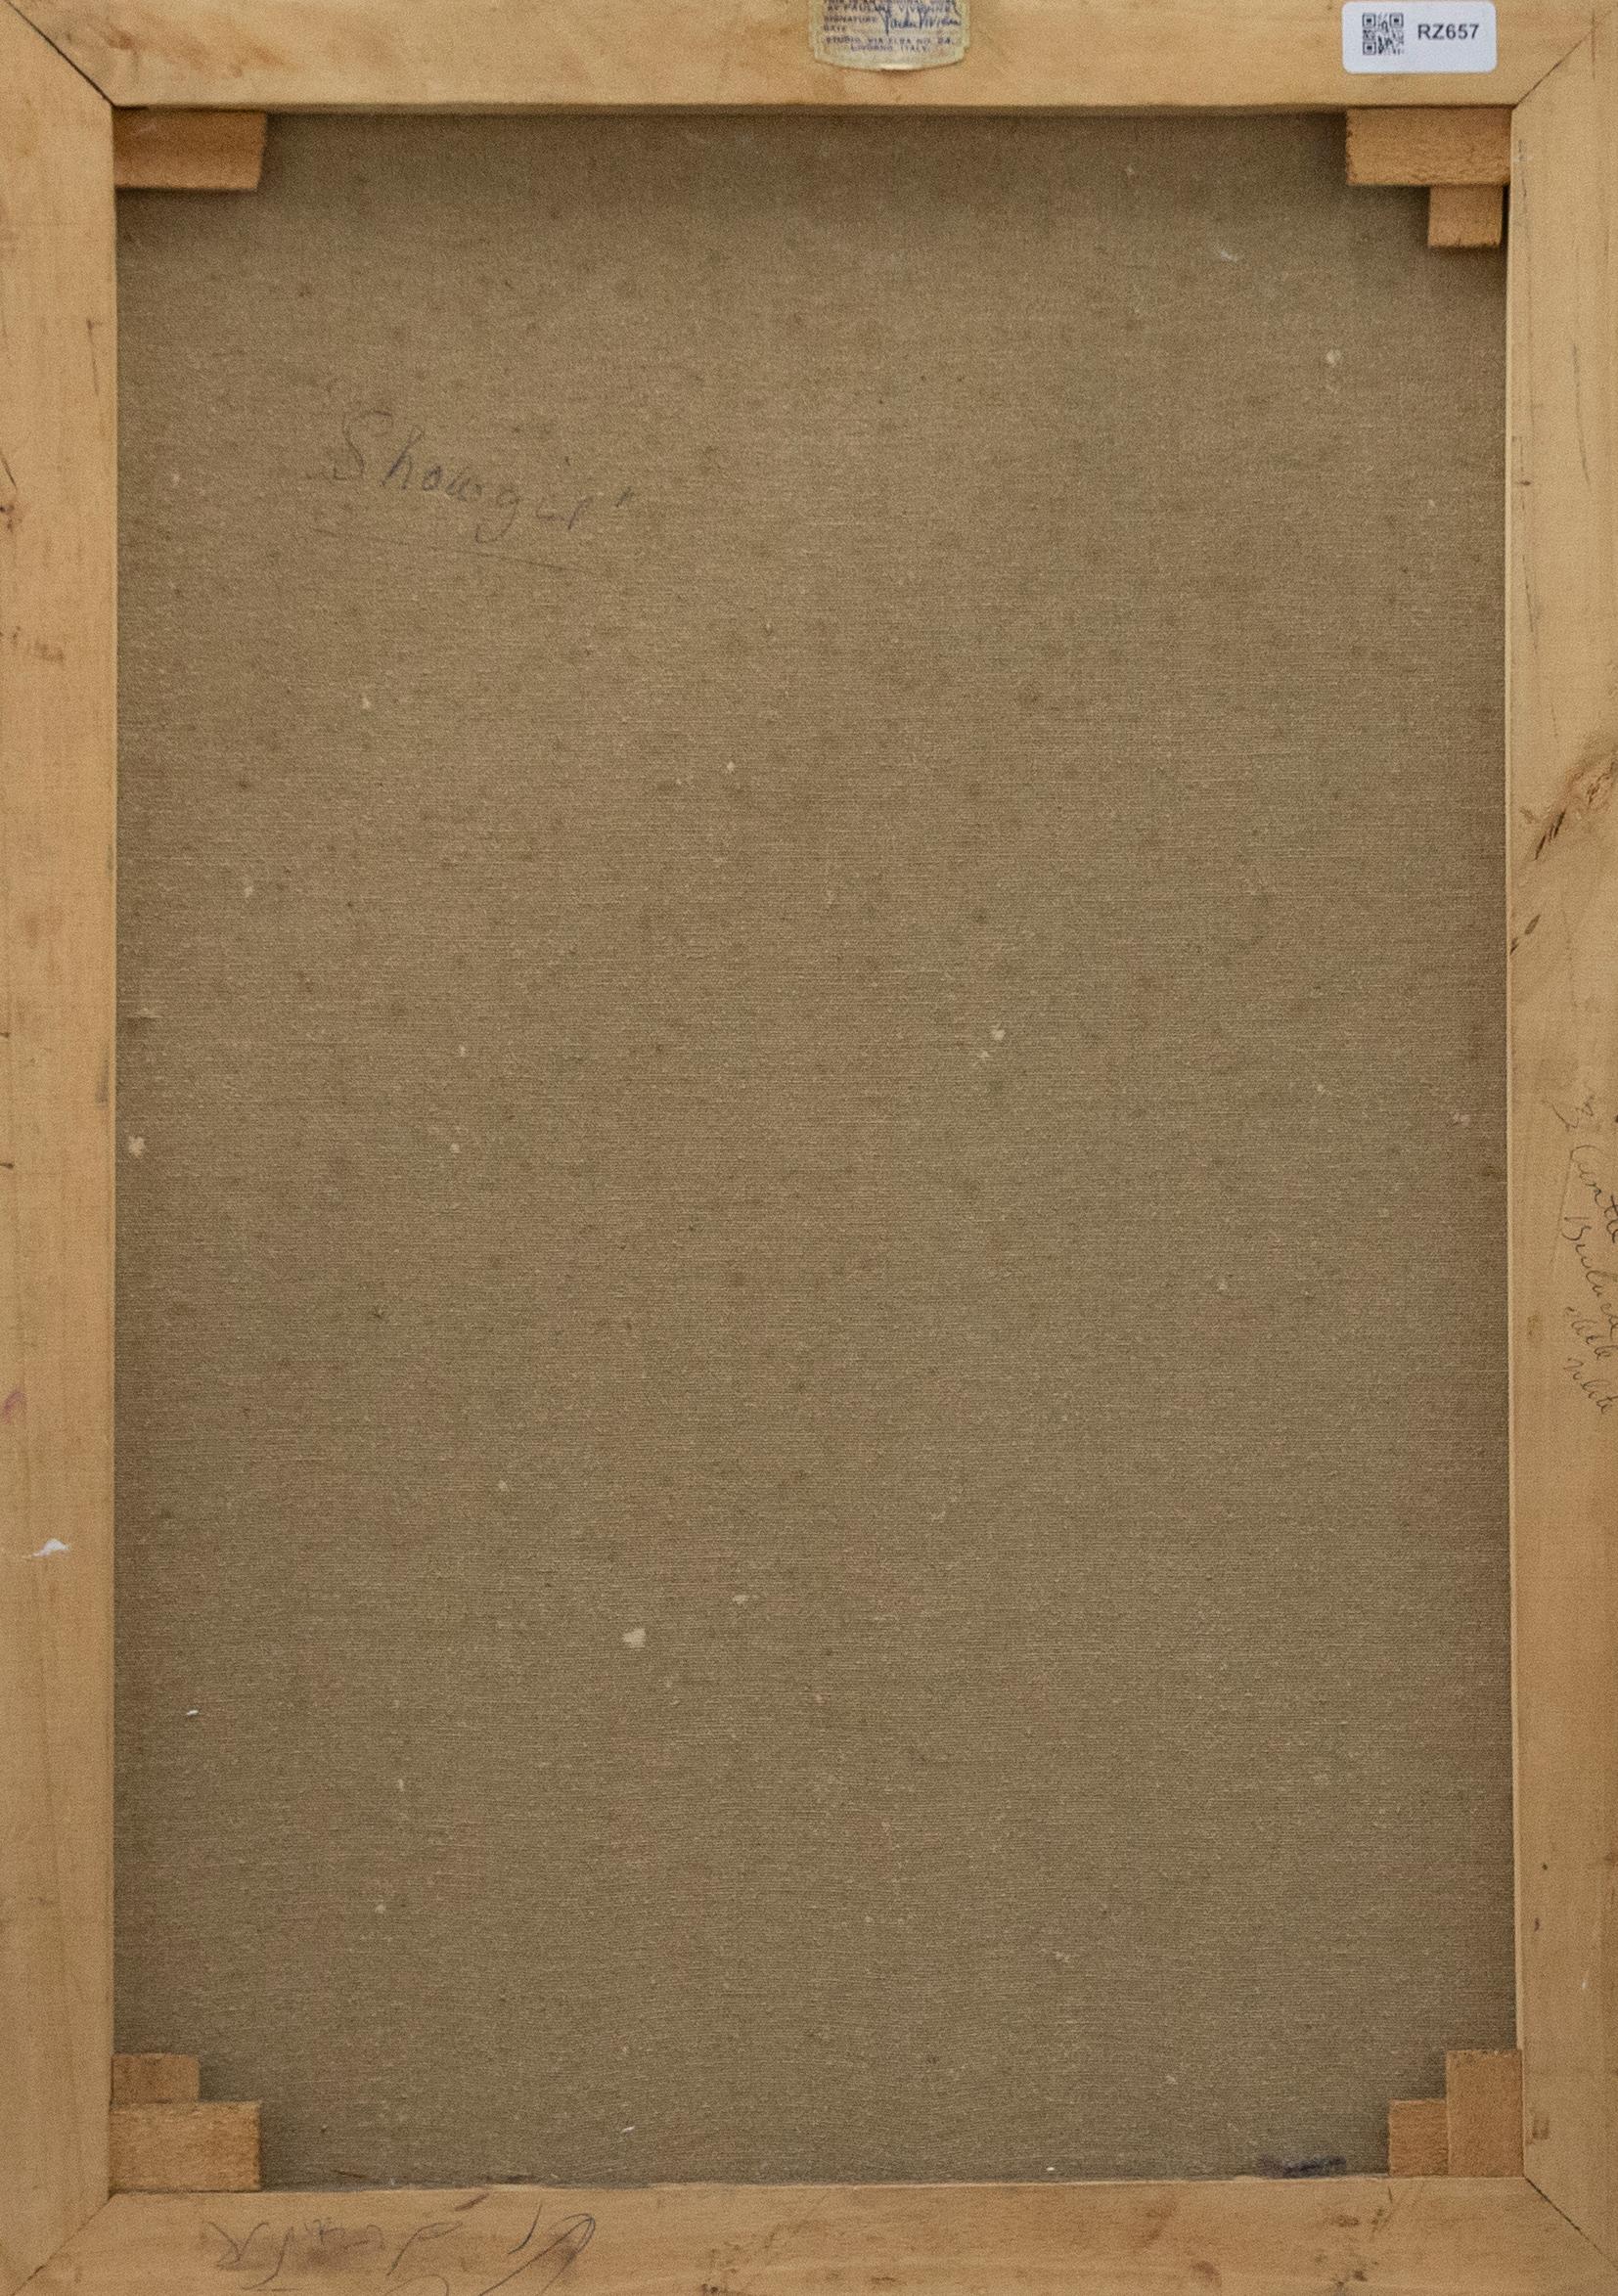 An original oil painting by Italian based artist Pauline Vivienne. Signed and dated (1971) to the lower left. Signed and titled verso. On canvas on stretchers.